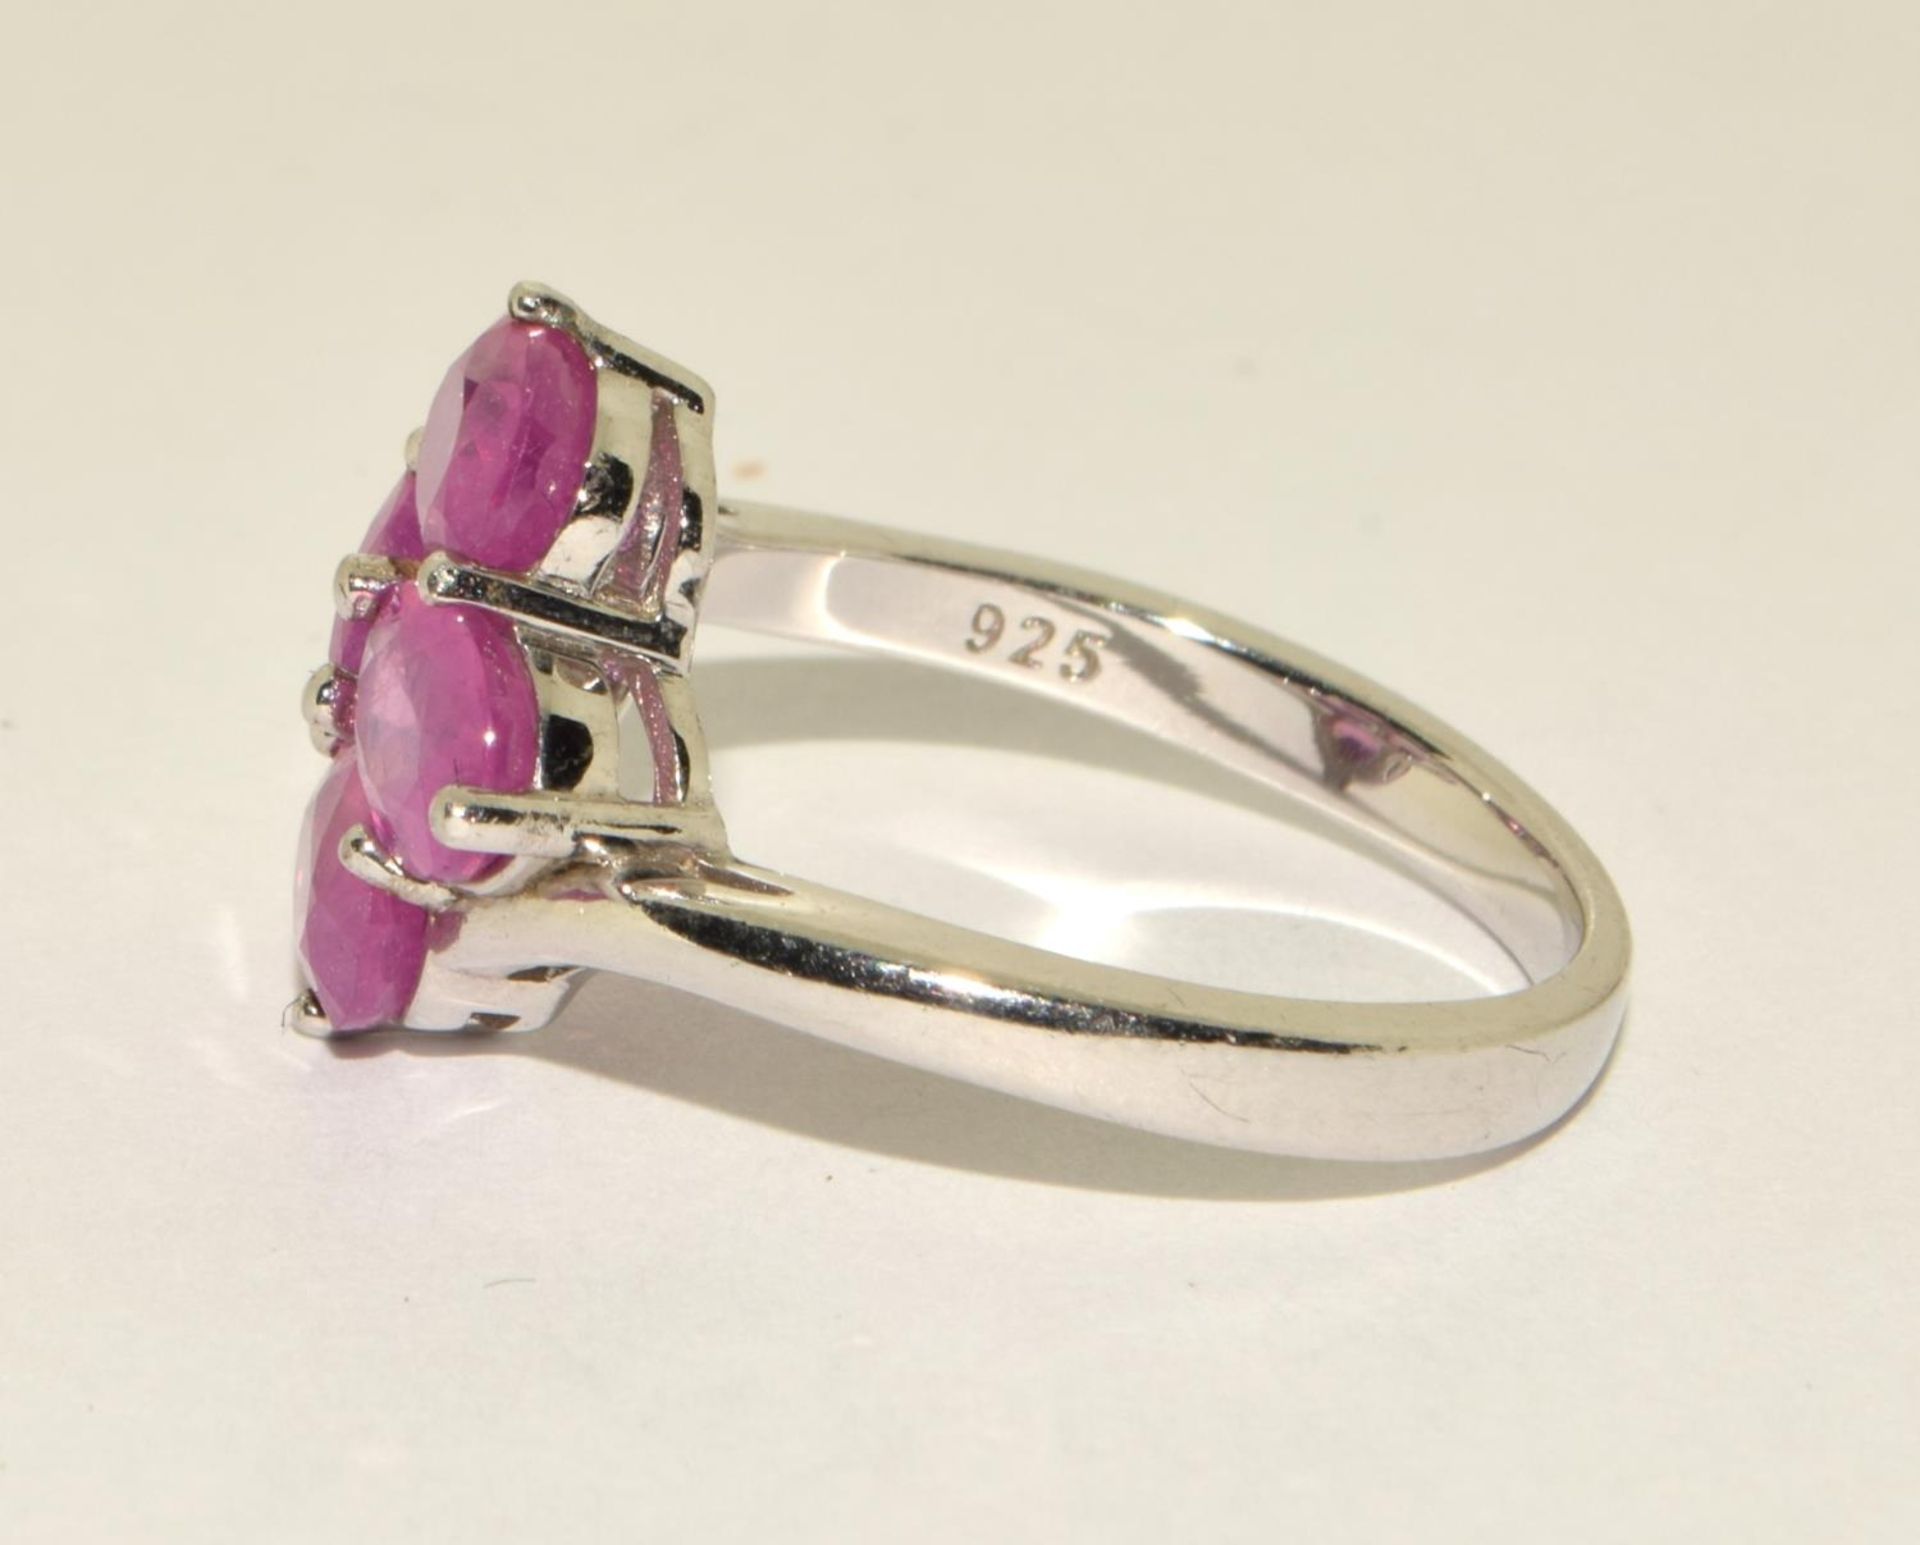 A 925 silver TGGC pink stone flower ring Size P - Image 2 of 3